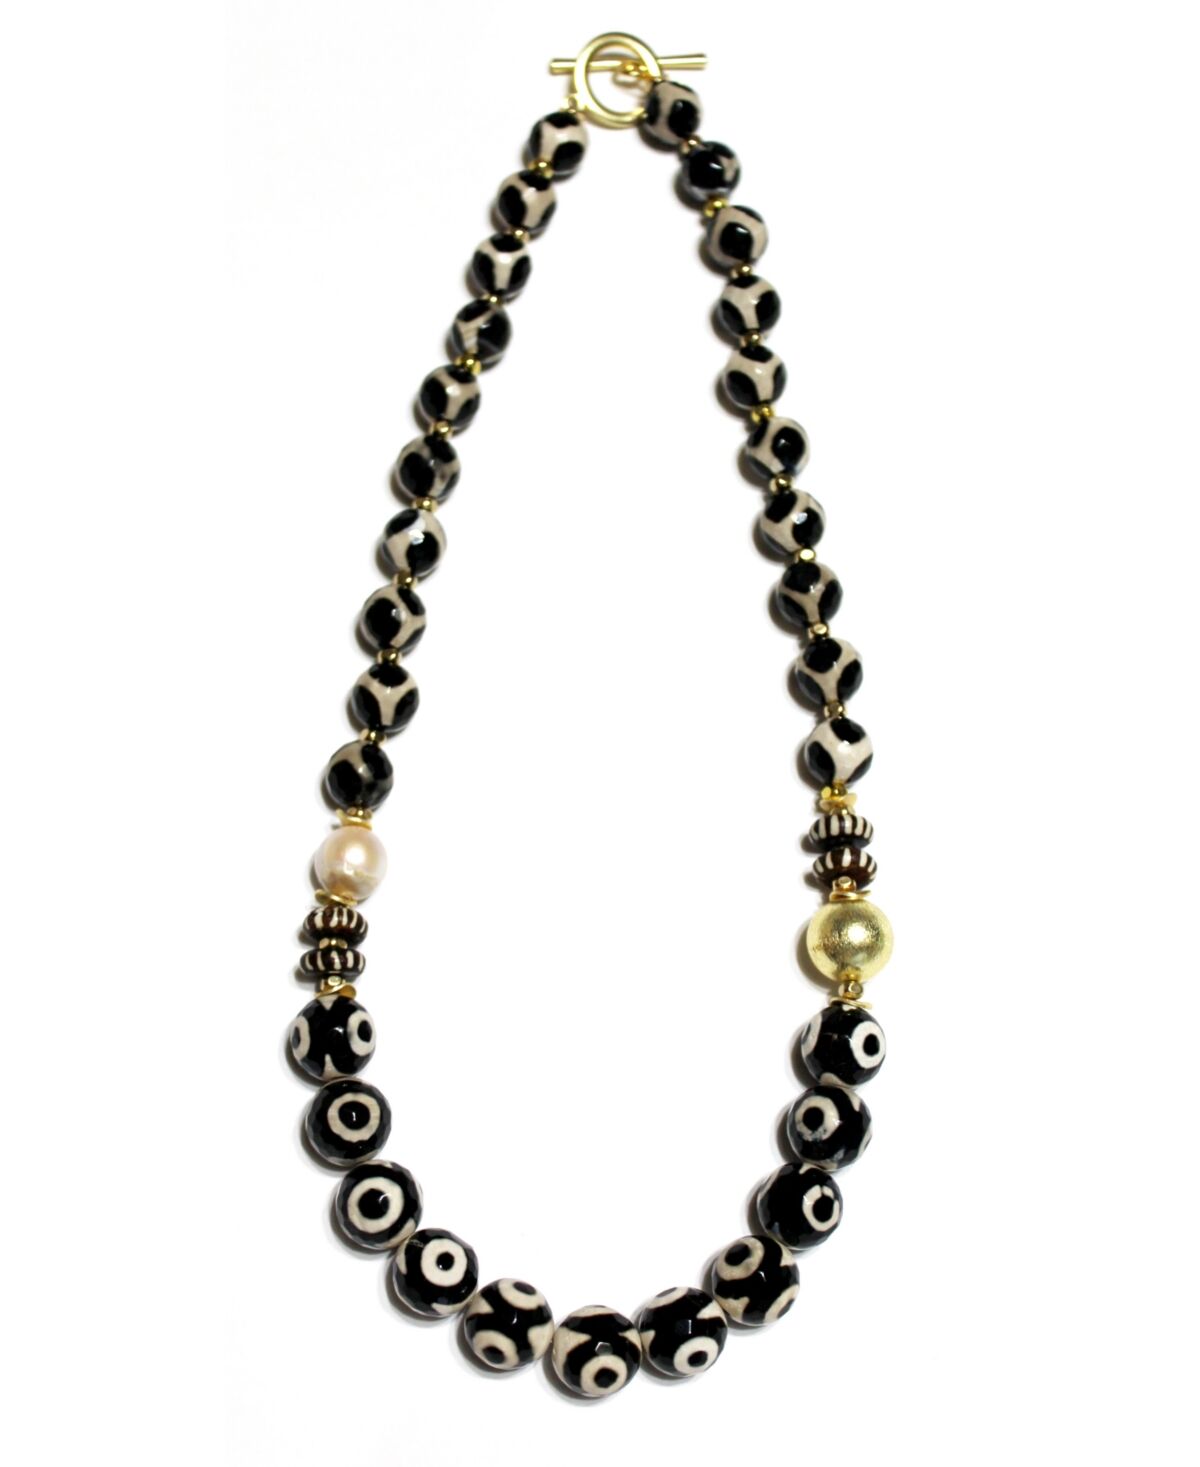 Michael Gabriel Designs Black Dahlia Tibetan Agate Beads and Genuine Pearl Necklace - Faceted Agate with Kenya Wood Accent Bea